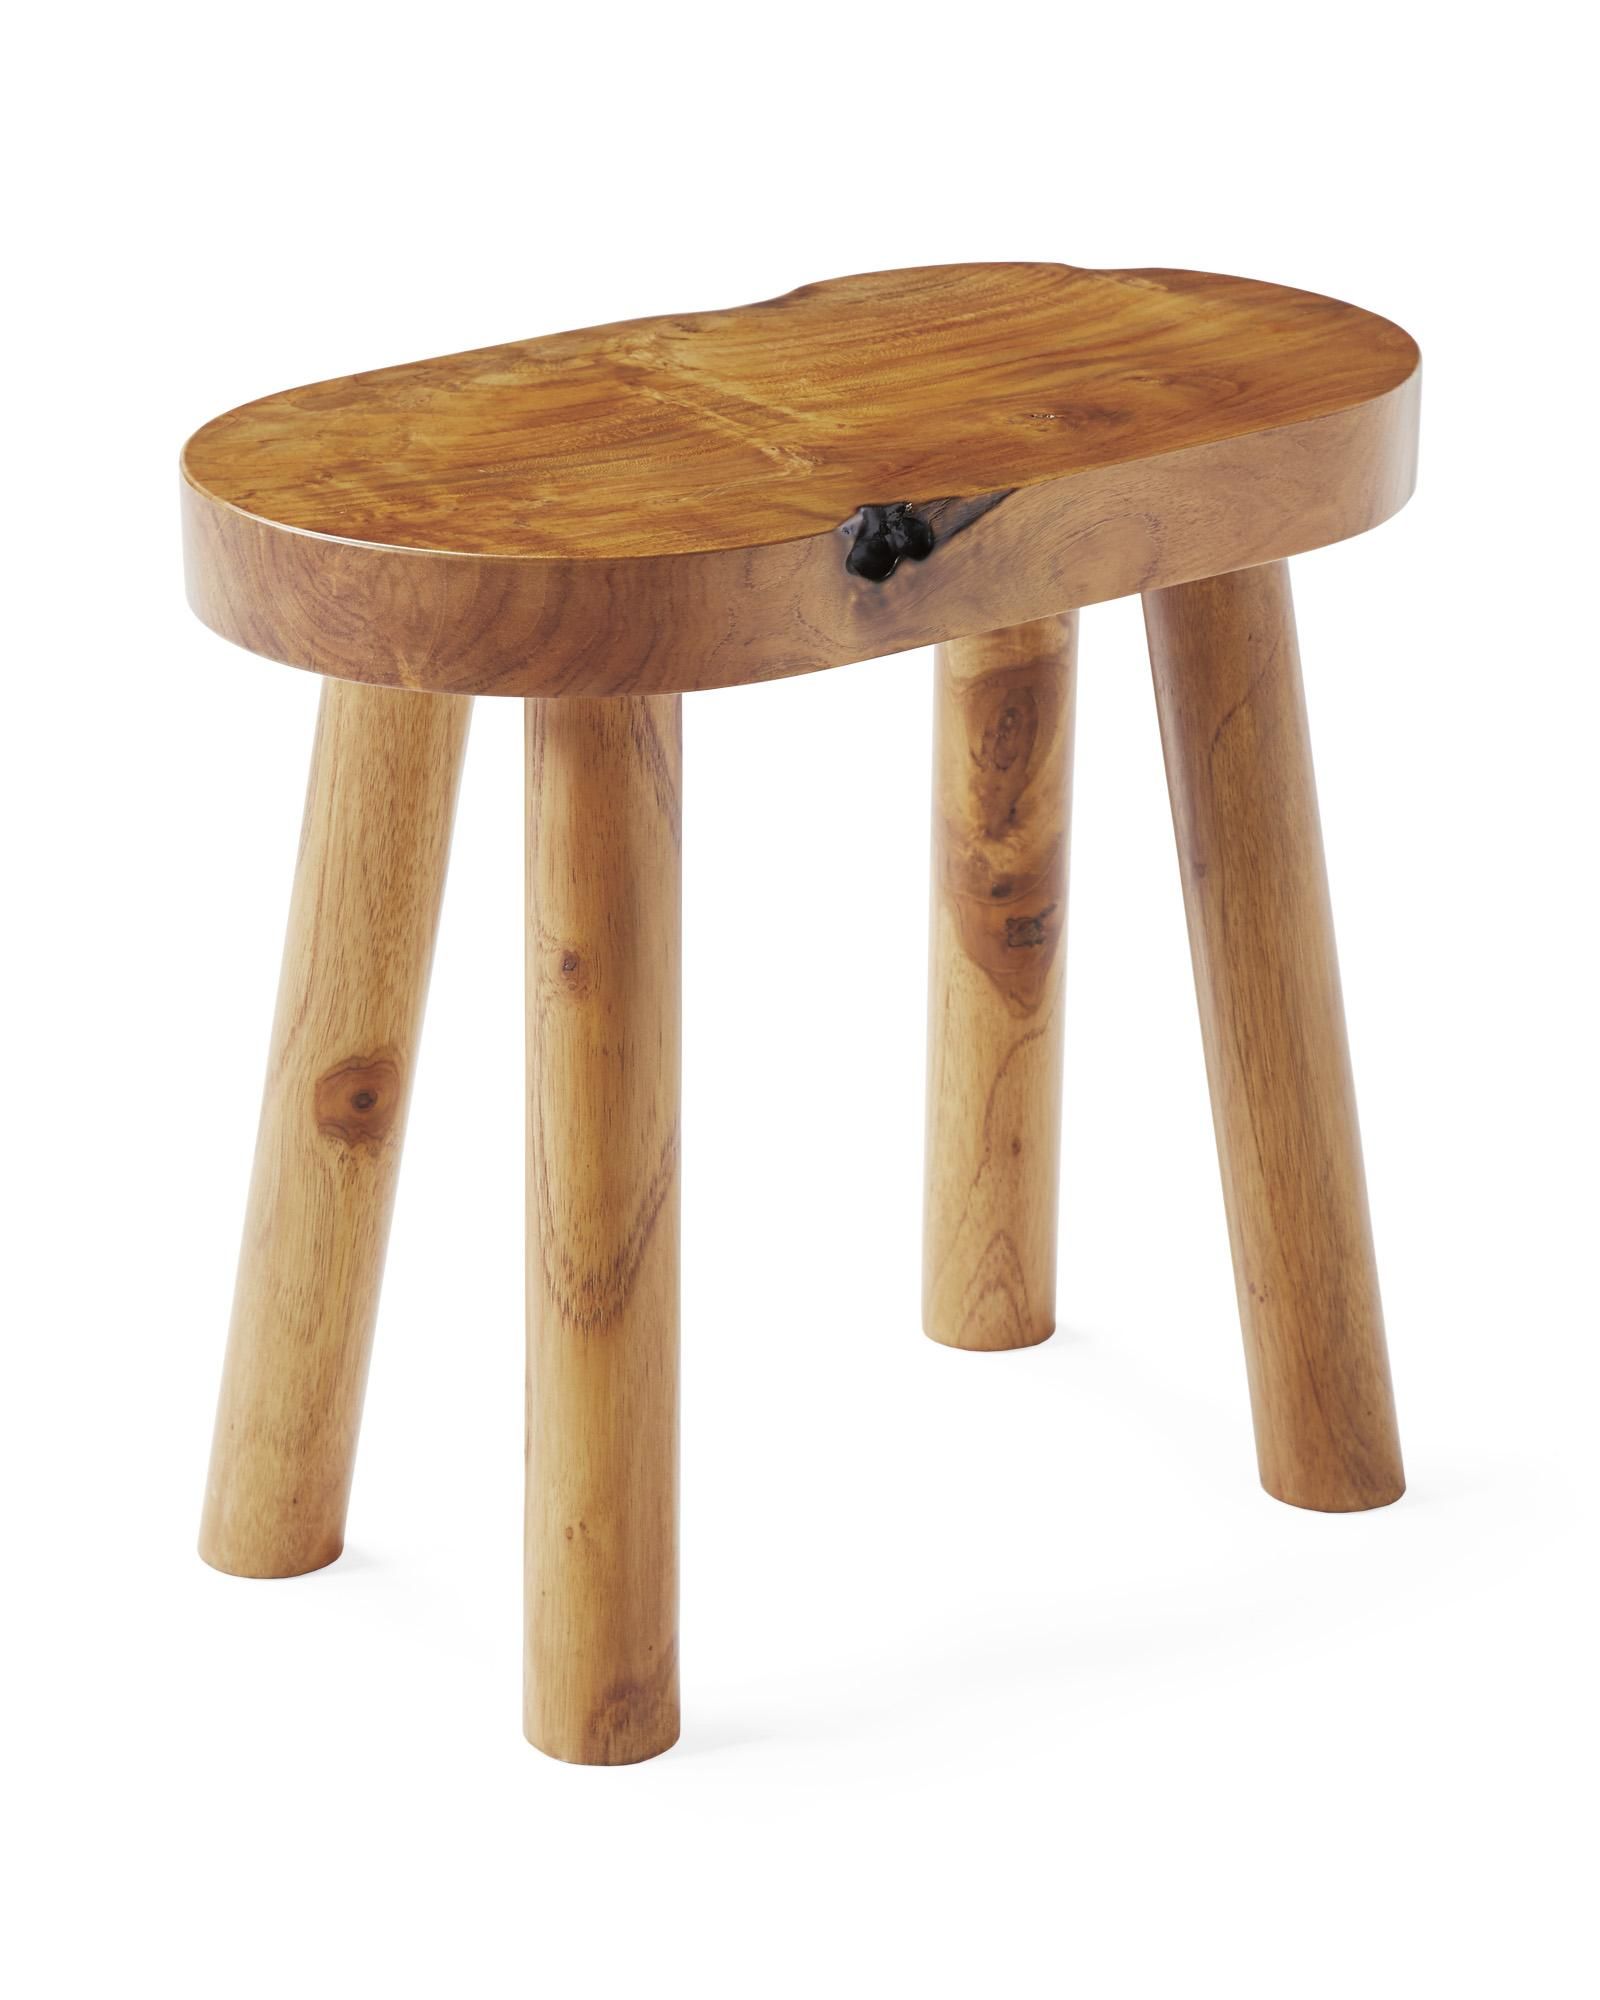 Teak Oval Stool | Serena and Lily